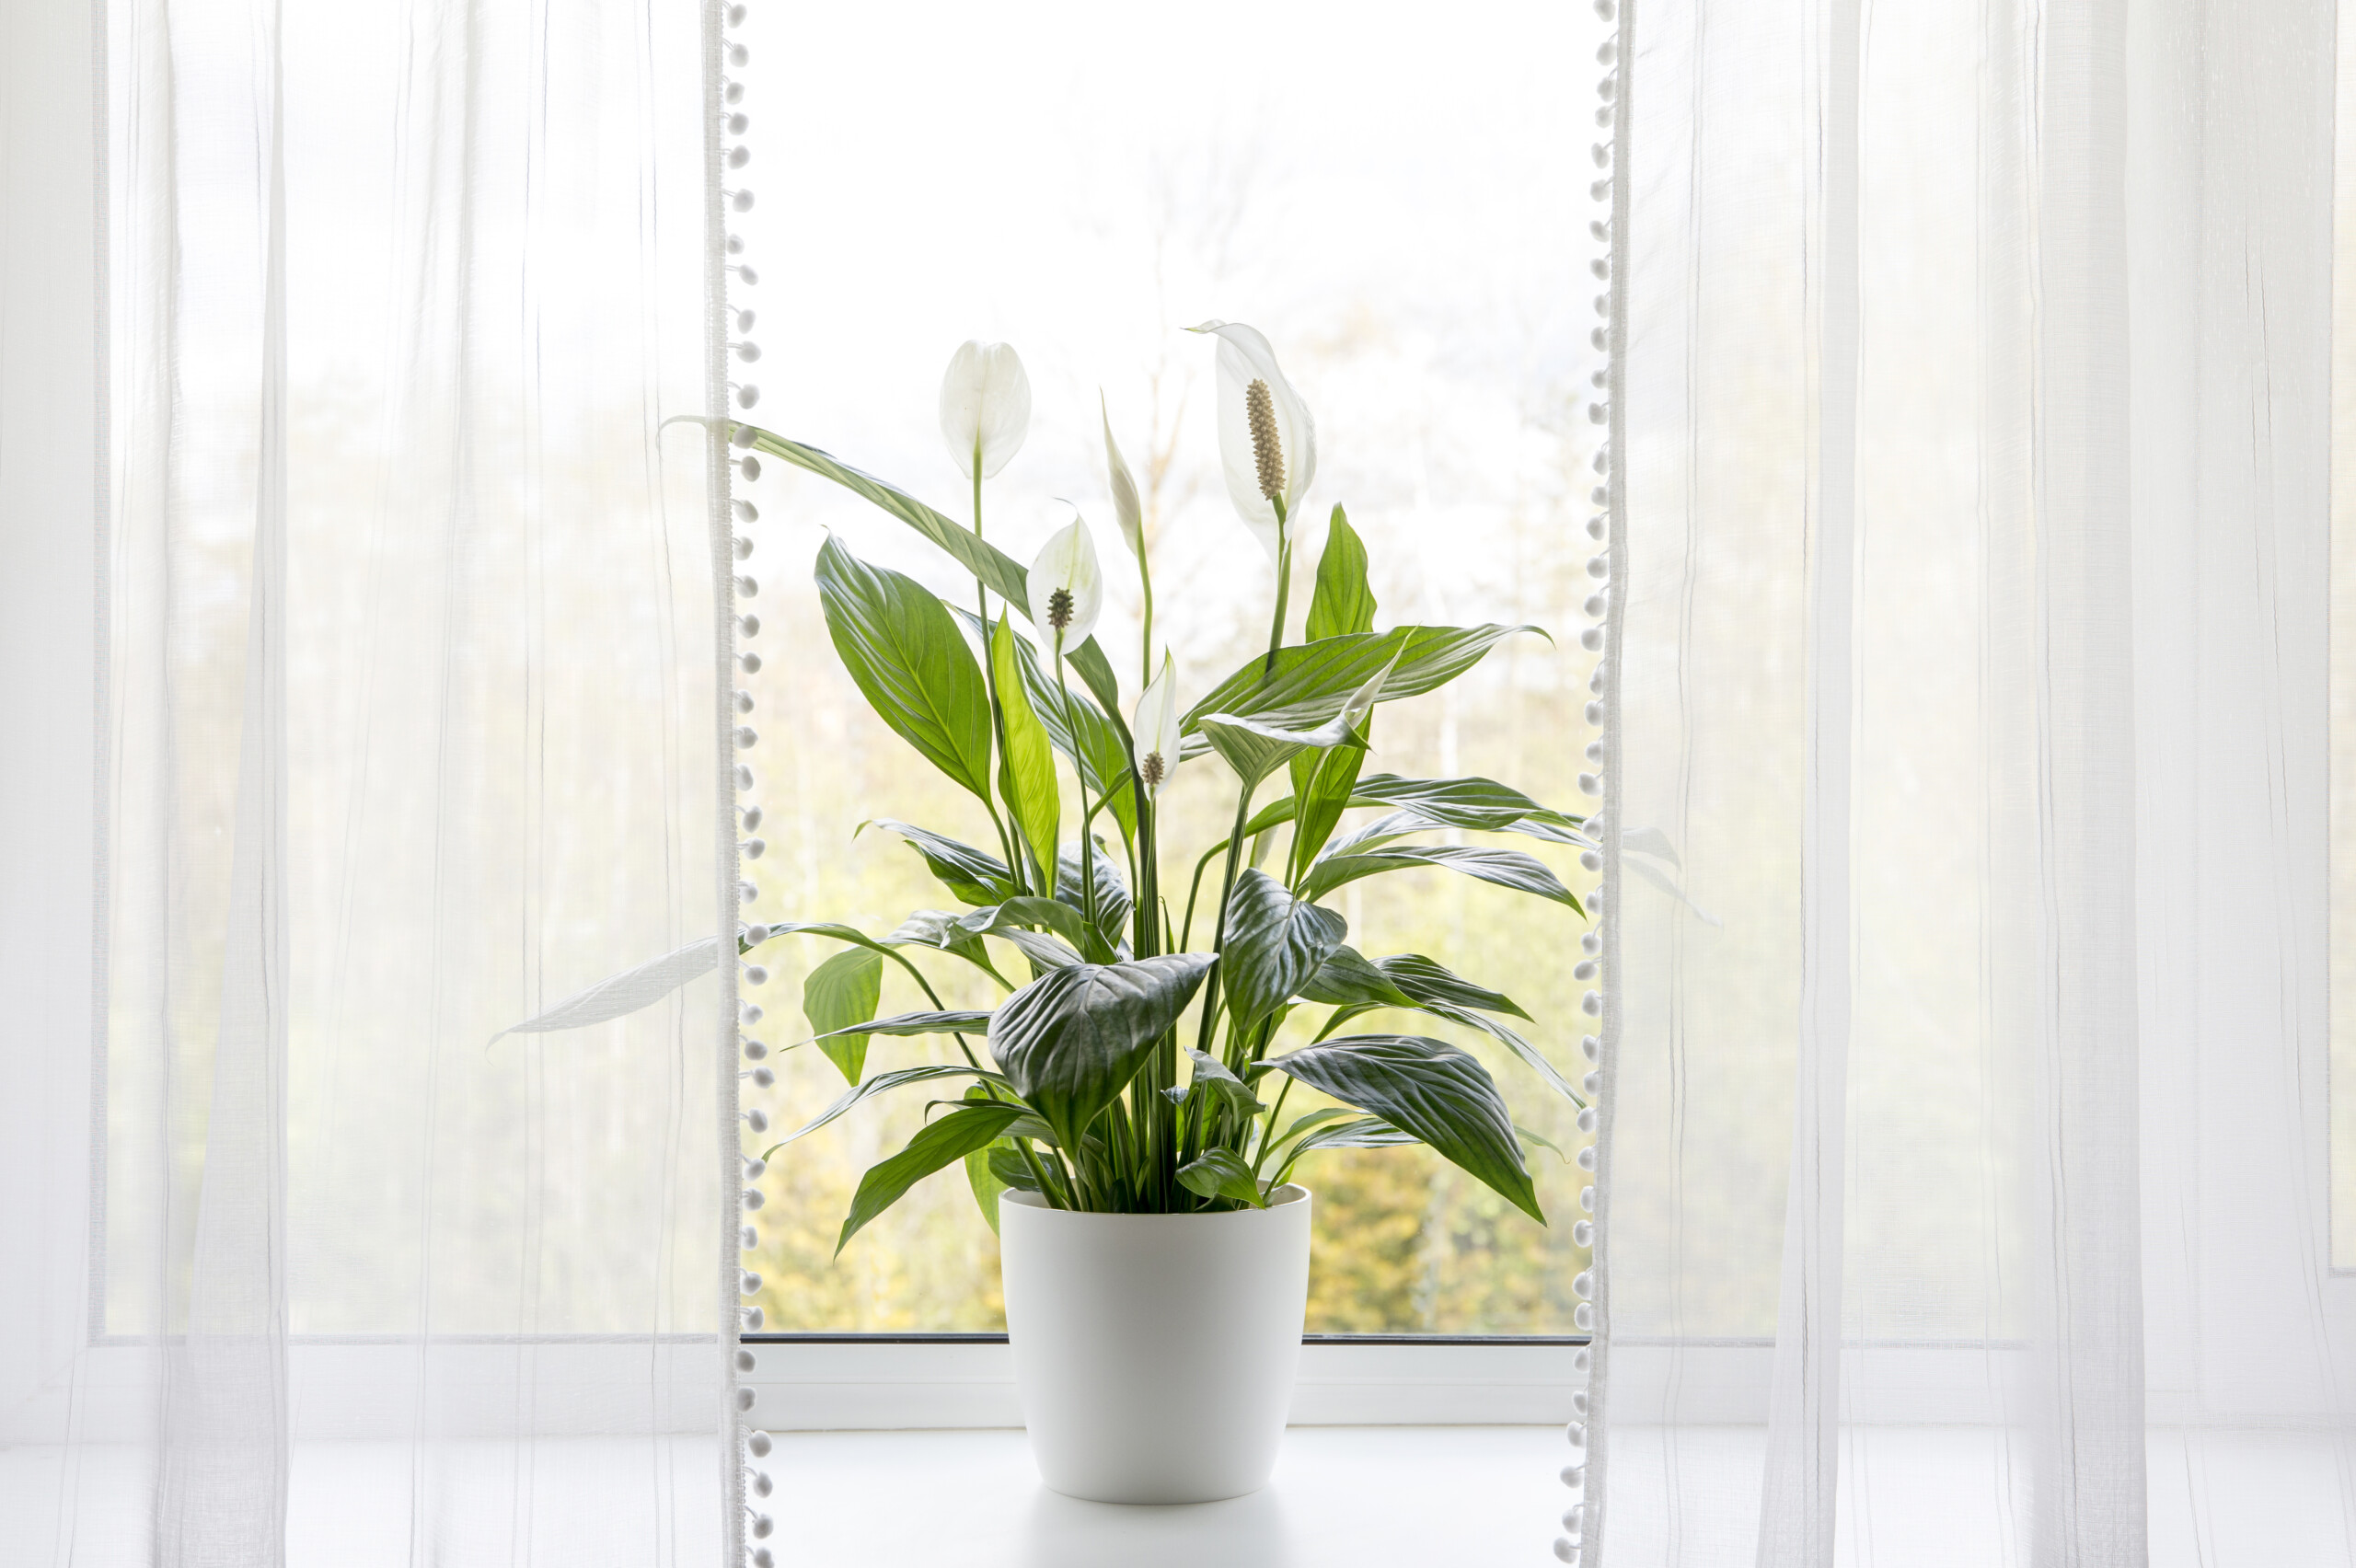 Air purfying house plants in home concept. Peace lilies growing in pot in home room and cleaning indoor air.